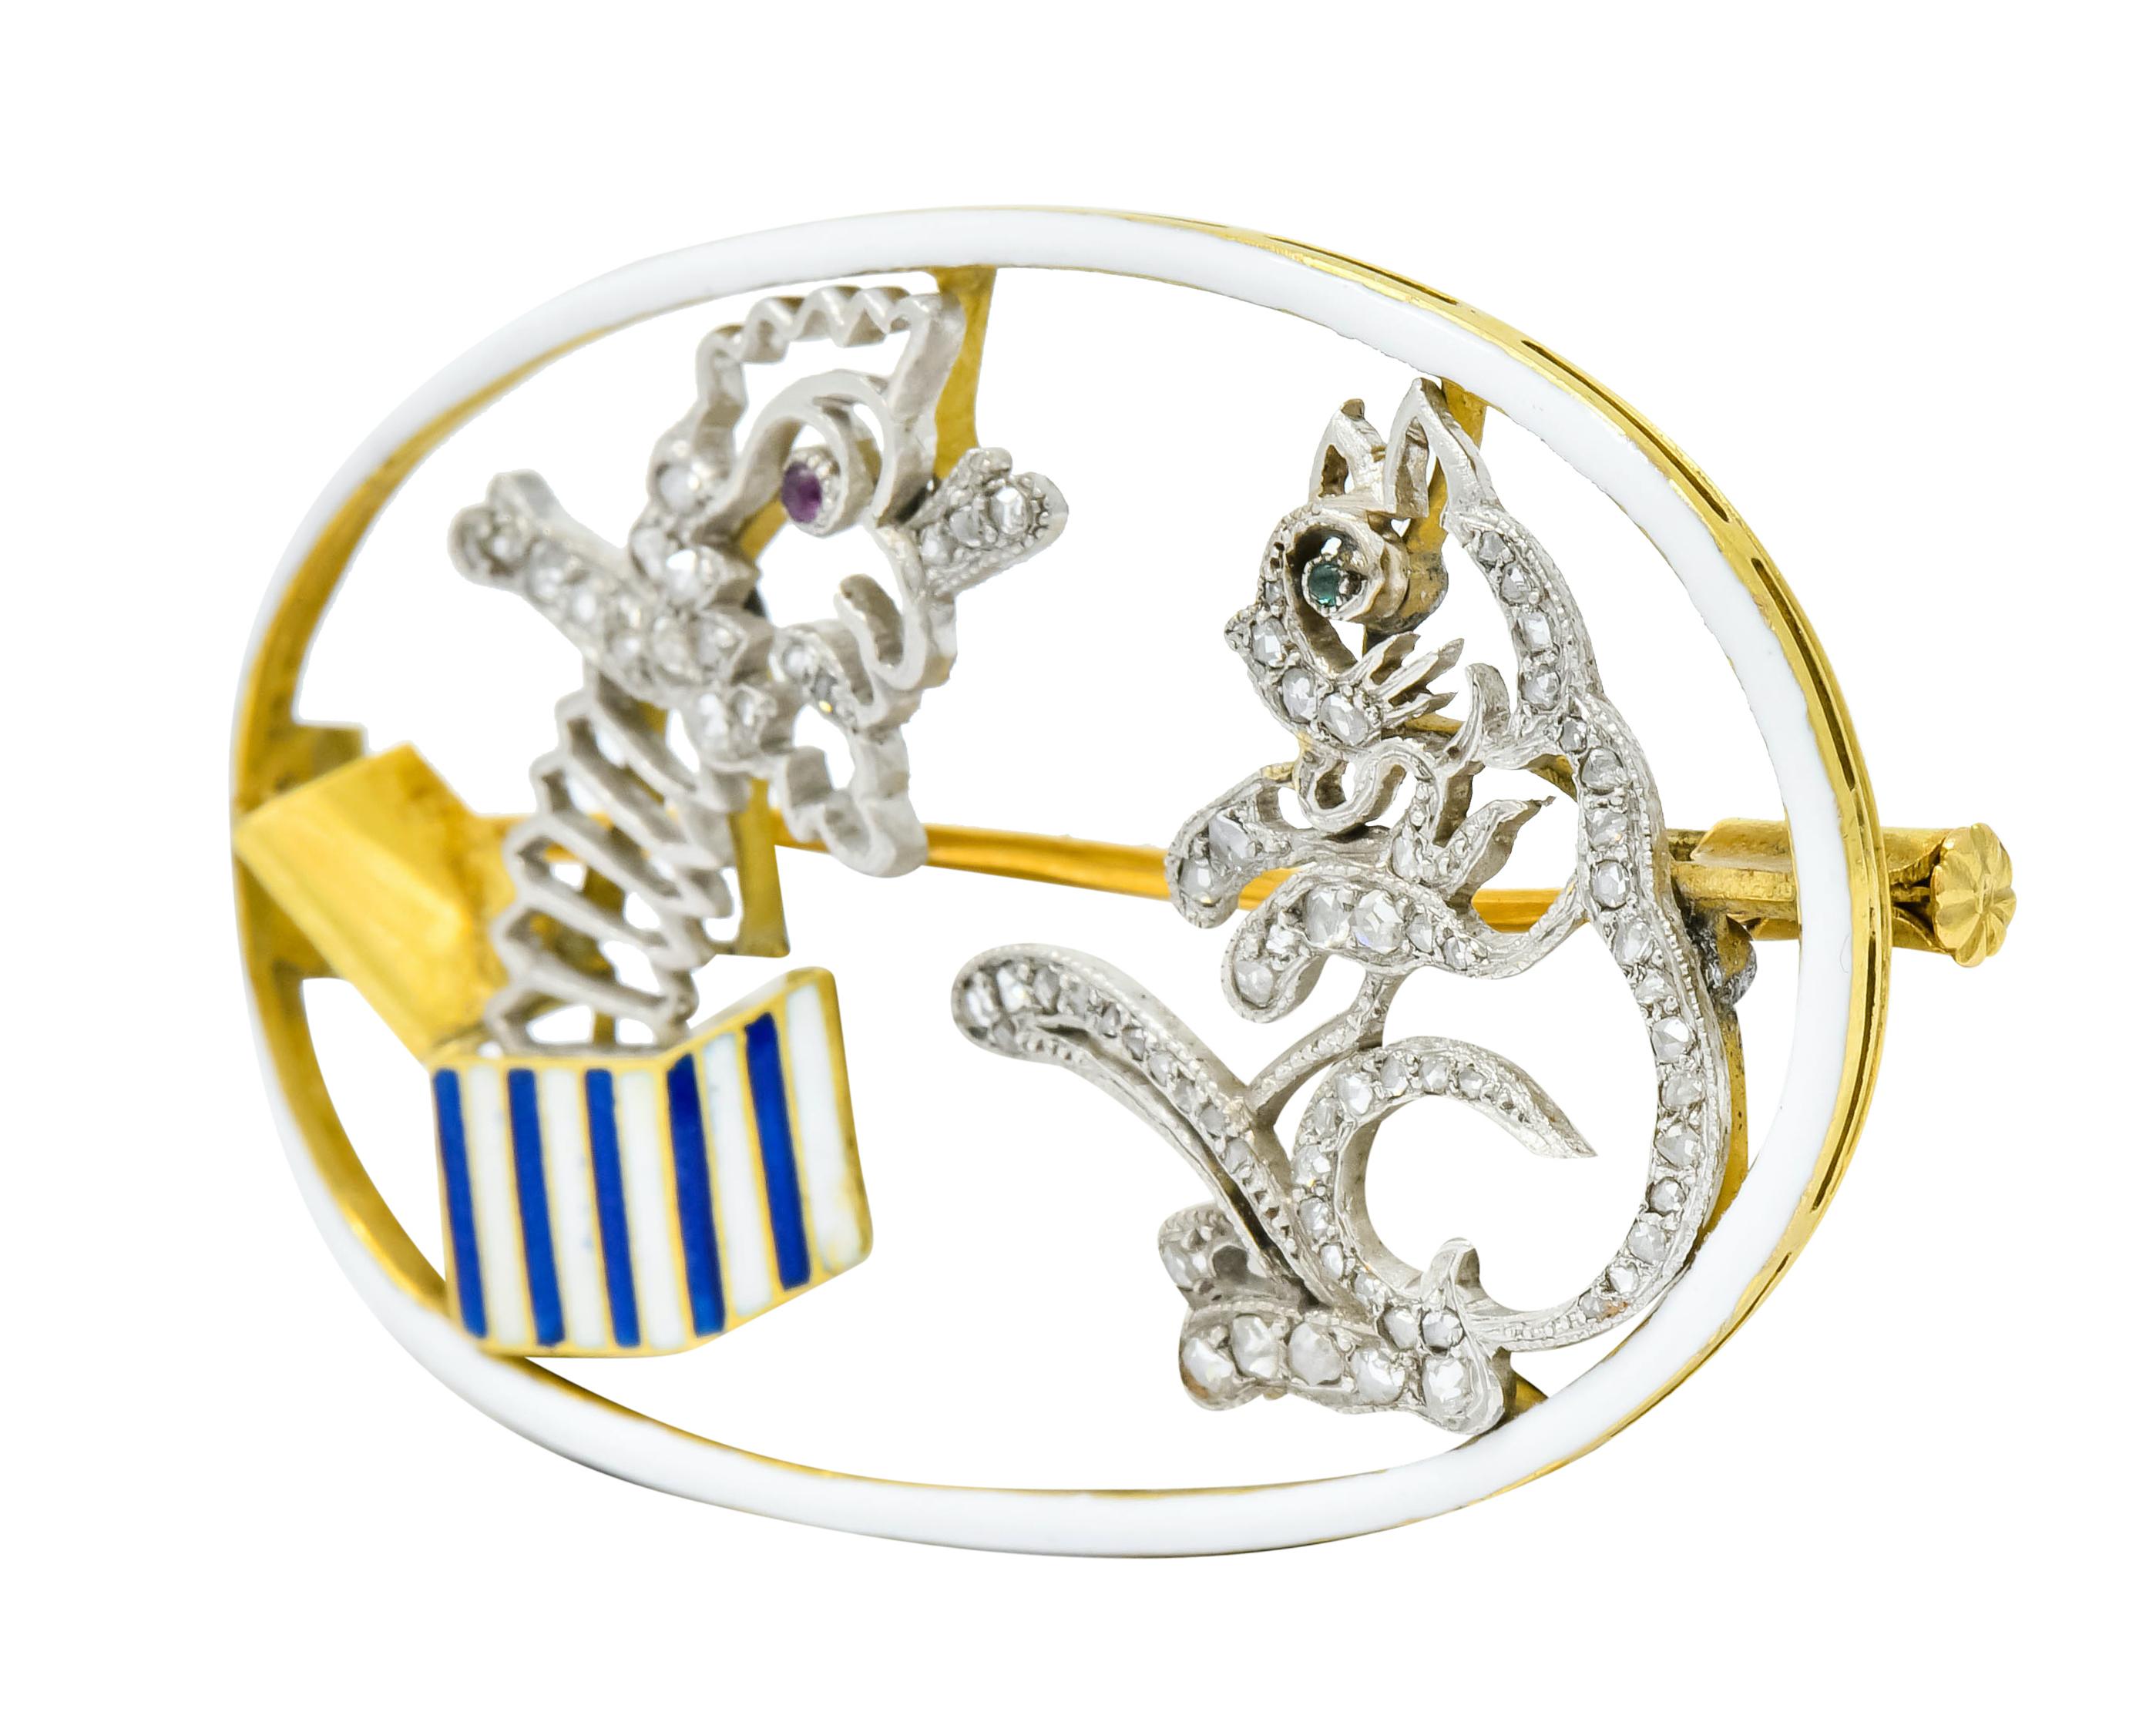 Brooch designed as a jack-in-the-box bursting from its box surprising a cat

Box is striped with blue and white enamel with no loss, consistent with age, wear, and use

Both figures feature a milgrain edge and are set throughout with rose cut